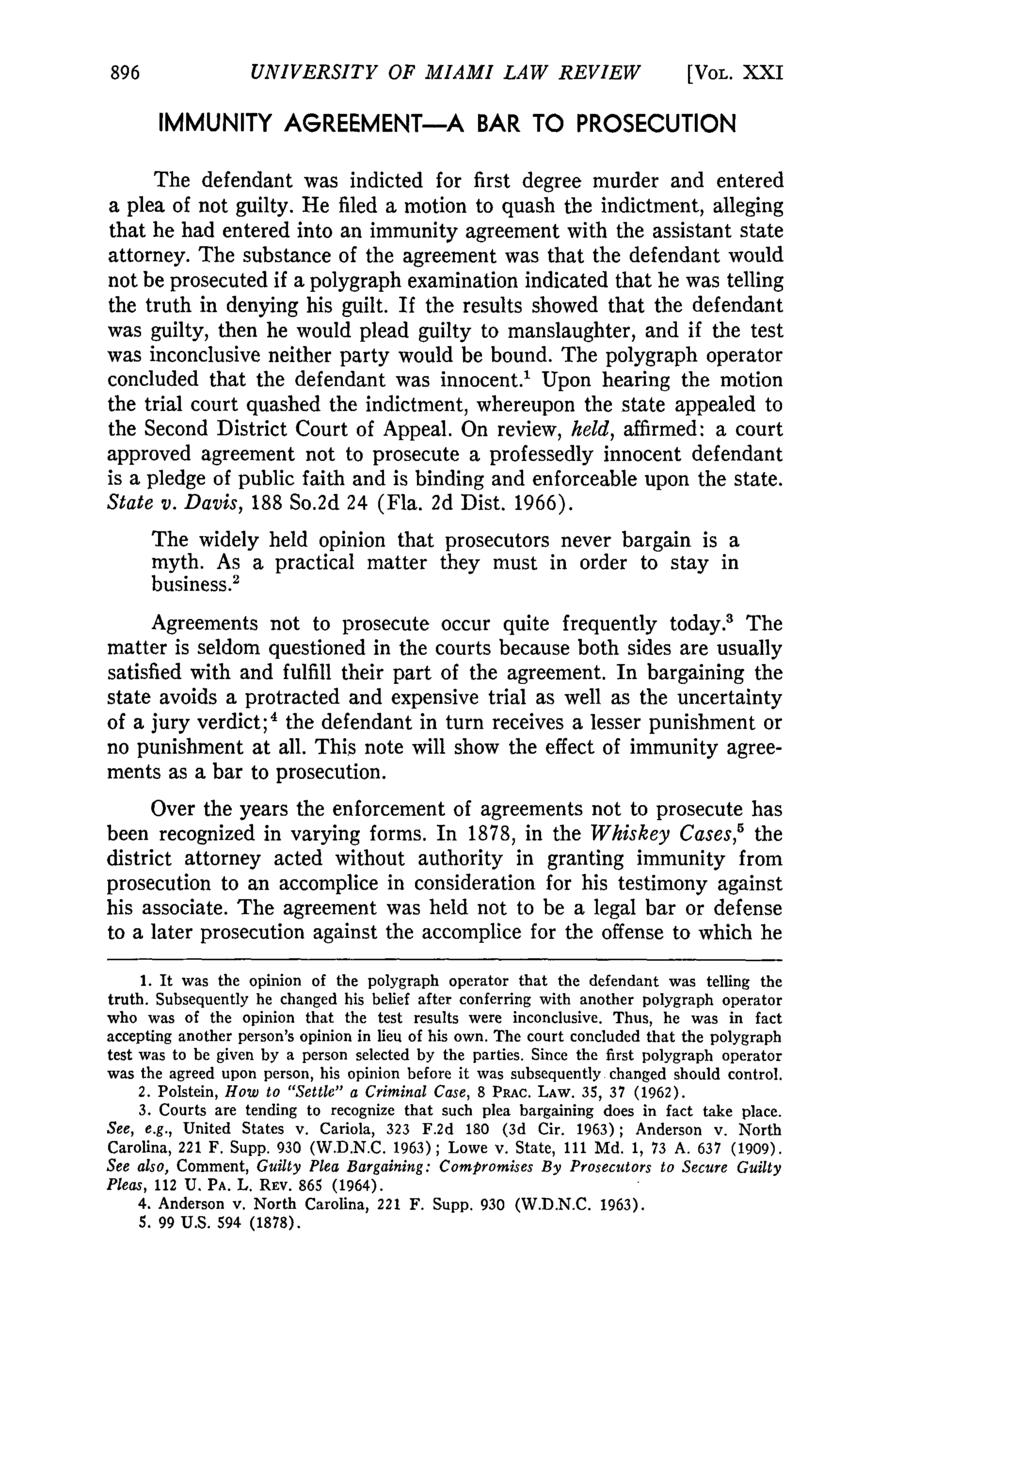 UNIVERSITY OF MIAMI LAW REVIEW [VOL. XXI IMMUNITY AGREEMENT-A BAR TO PROSECUTION The defendant was indicted for first degree murder and entered a plea of not guilty.